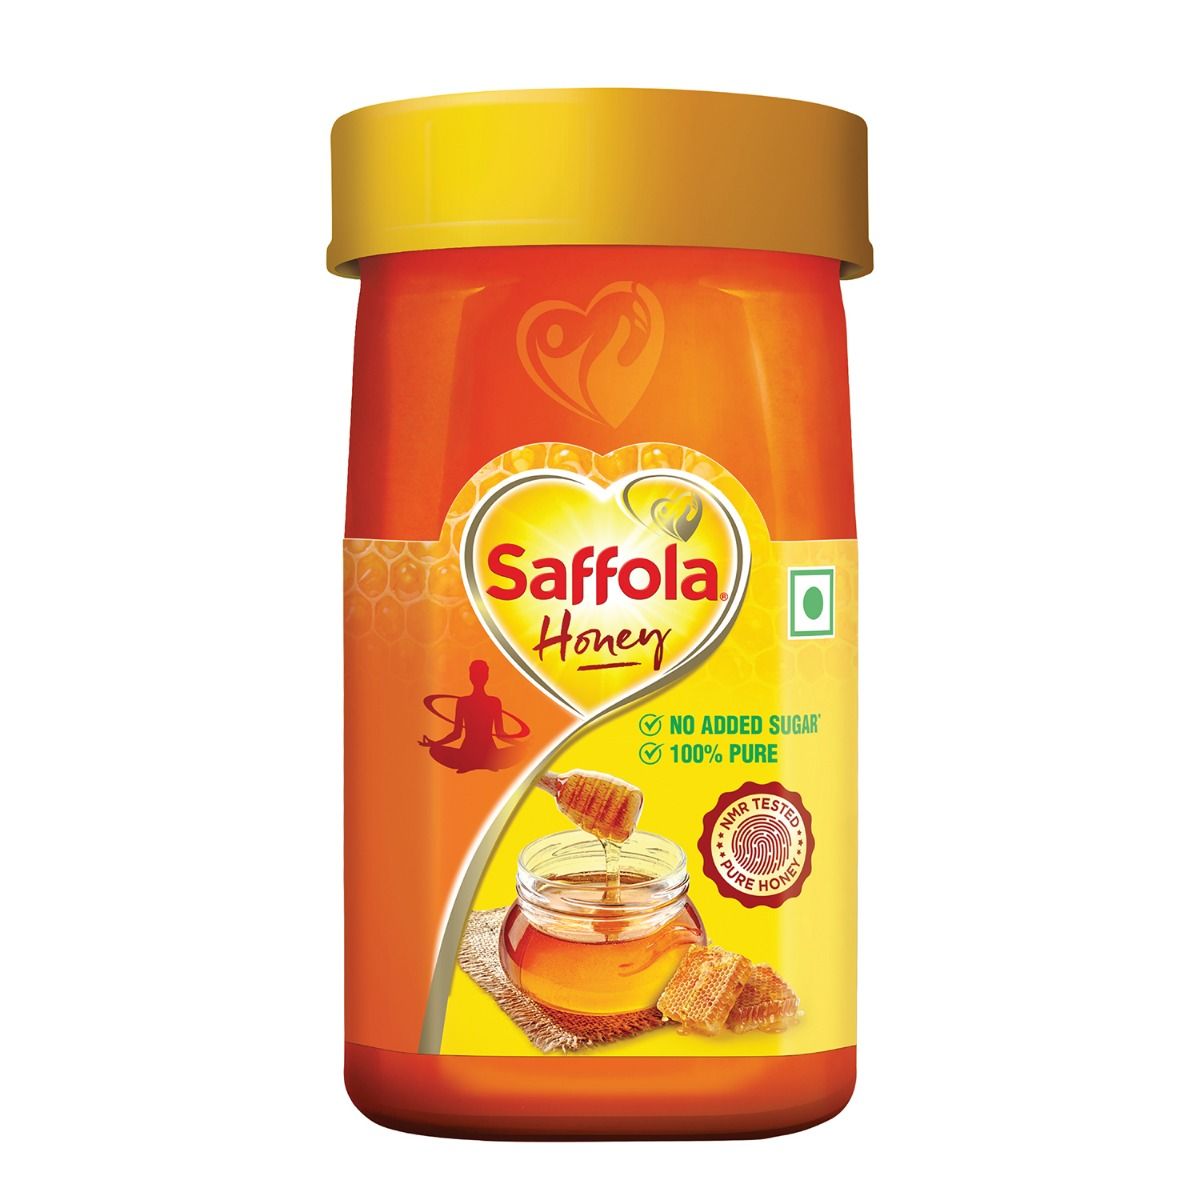 Saffola Honey, 250 gm, Pack of 1 